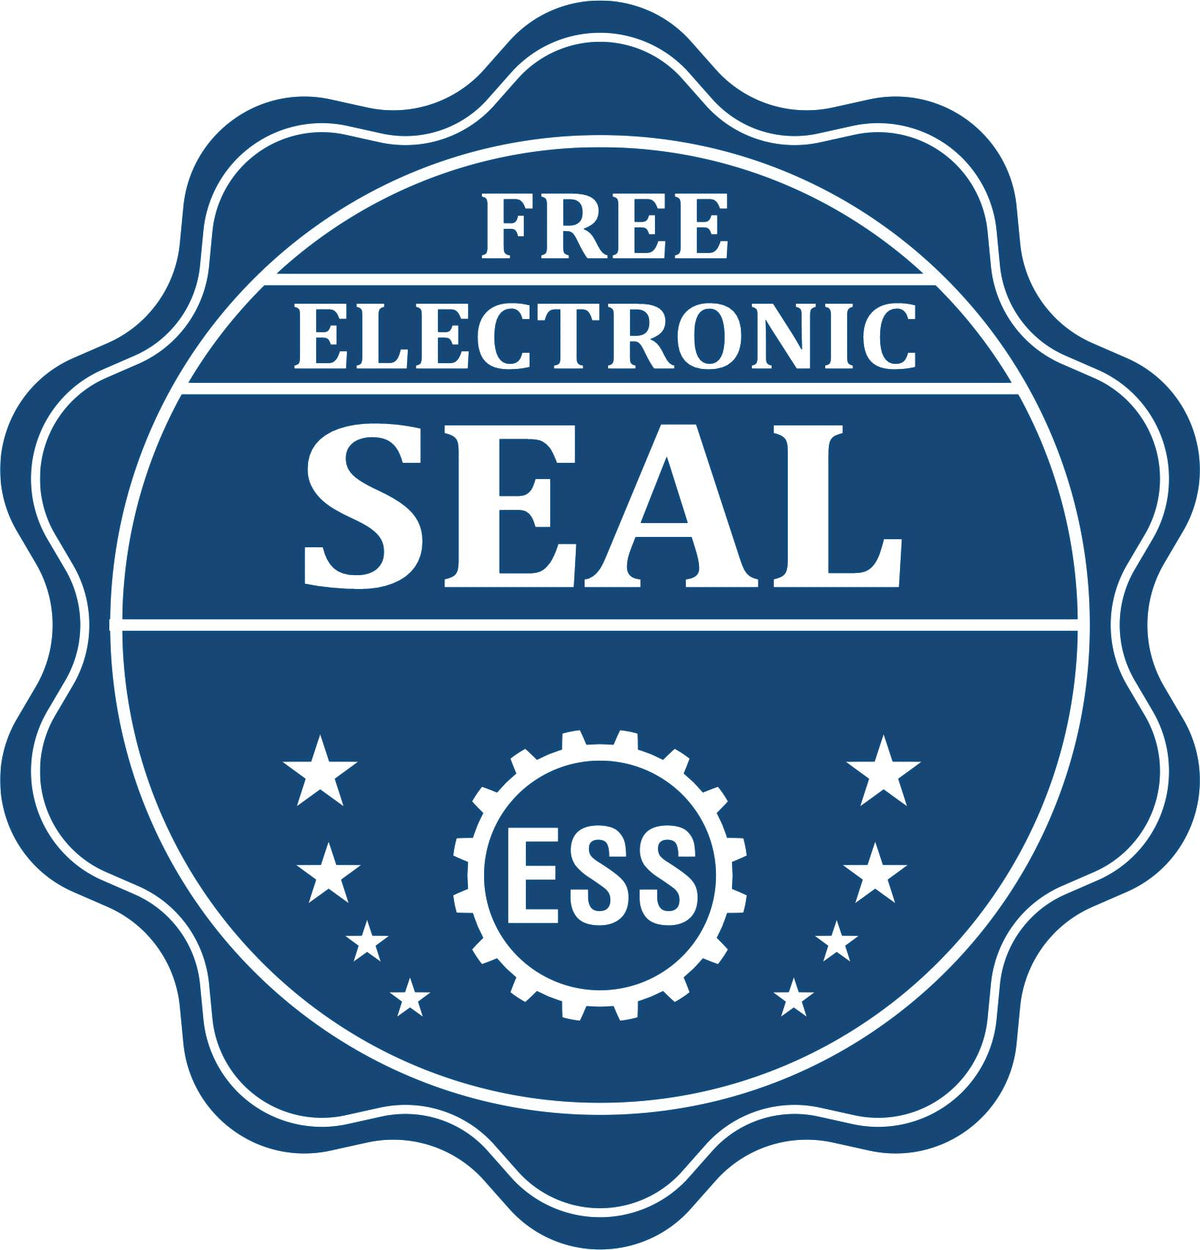 A badge showing a free electronic seal for the Handheld Pennsylvania Professional Geologist Embosser with stars and the ESS gear on the emblem.